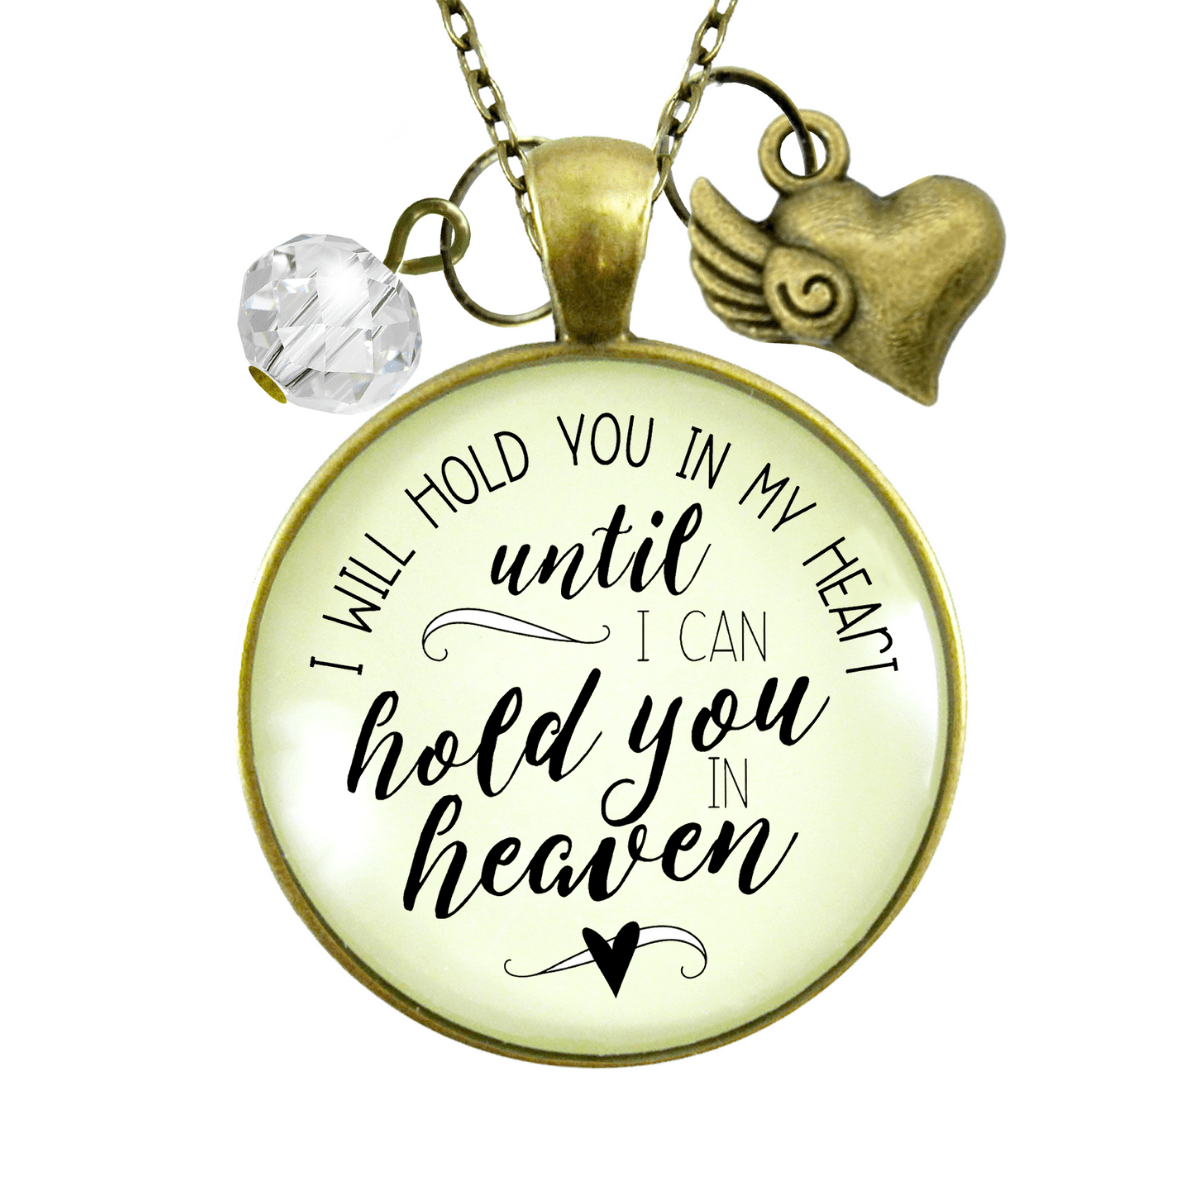 Gutsy Goodness Memorial Necklace Hold You in Heart Until Heaven Remembrance Jewelry - Gutsy Goodness Handmade Jewelry;Memorial Necklace Hold You In Heart Until Heaven Remembrance Jewelry - Gutsy Goodness Handmade Jewelry Gifts